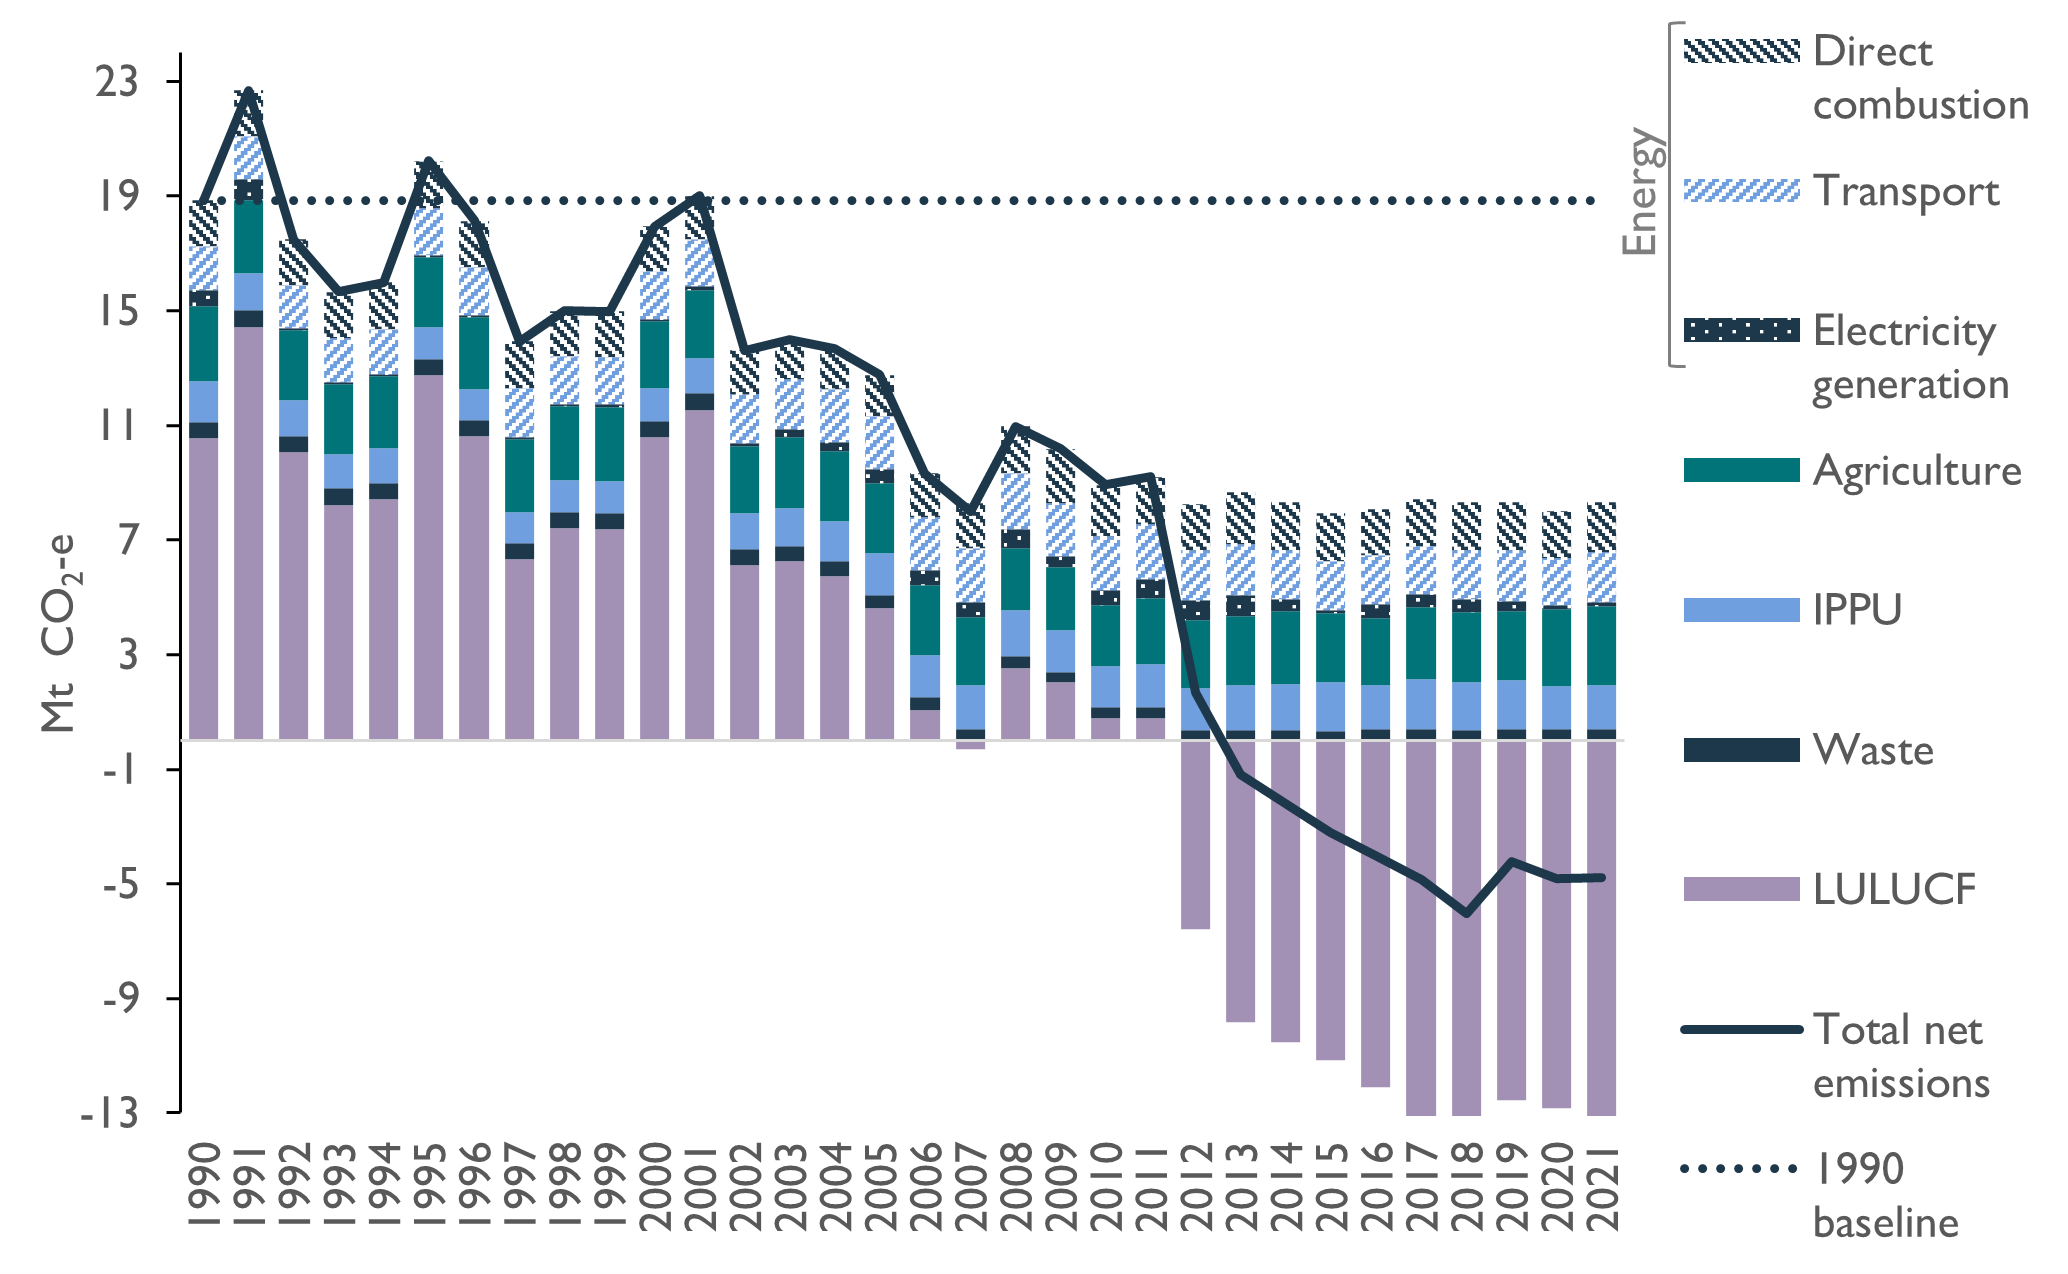 This figure combines a stacked bar chart, showing the change in sectoral and energy sub-sectoral annual greenhouse gas emissions, with a line graph showing total net emissions, from 1990 to 2021. It shows the decline in Tasmania’s net emissions, from 18.85 Mt CO2-e in 1990, peaking at 22.69 Mt CO2-e in 1991, declining then rising slightly to 20.23 Mt CO2-e in 1995, declining and rising again to 18.85 Mt CO2-e in 2001 before declining to minus 4.80 Mt CO2-e in 2021. It shows that the Land Use, Land Use Change and Forestry sector (LULUCF) was largely responsible for the changes in Tasmania’s total net emissions, with LULUCF emissions reaching a peak of 14.44 Mt CO2-e in 1991, declining then rising slightly to 12.76 Mt CO2-e in 1995, declining and rising again to 11.53 Mt CO2-e in 2001, before declining to become a net carbon sink, first in 2007, and again from 2012, reaching a minimum of minus 13.13 Mt CO2-e in 2021.